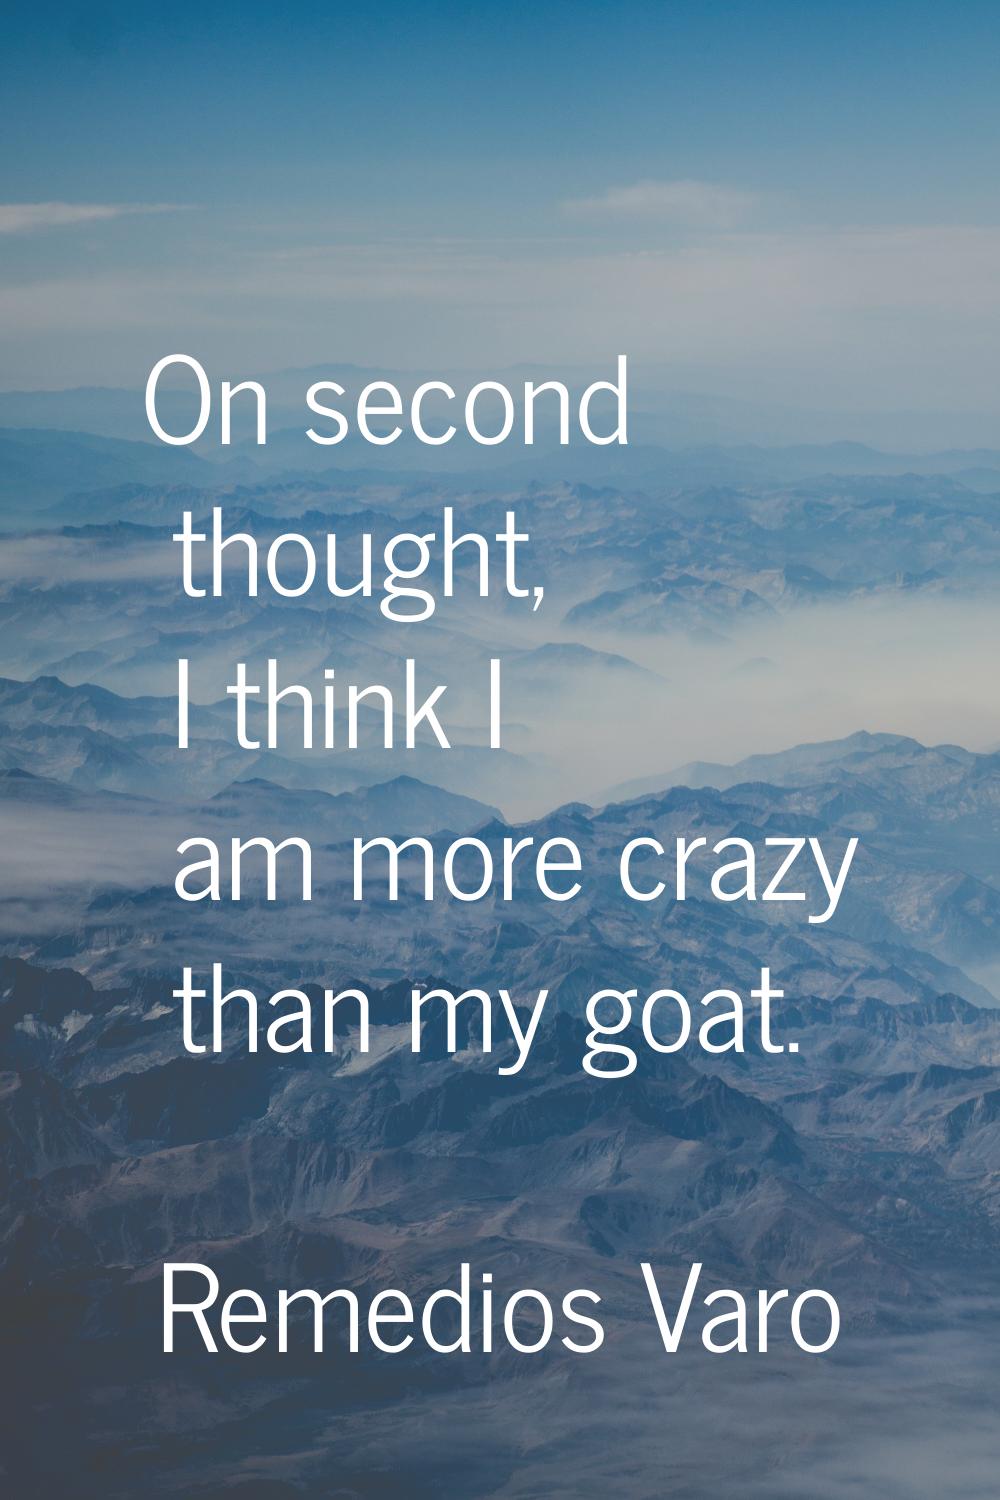 On second thought, I think I am more crazy than my goat.